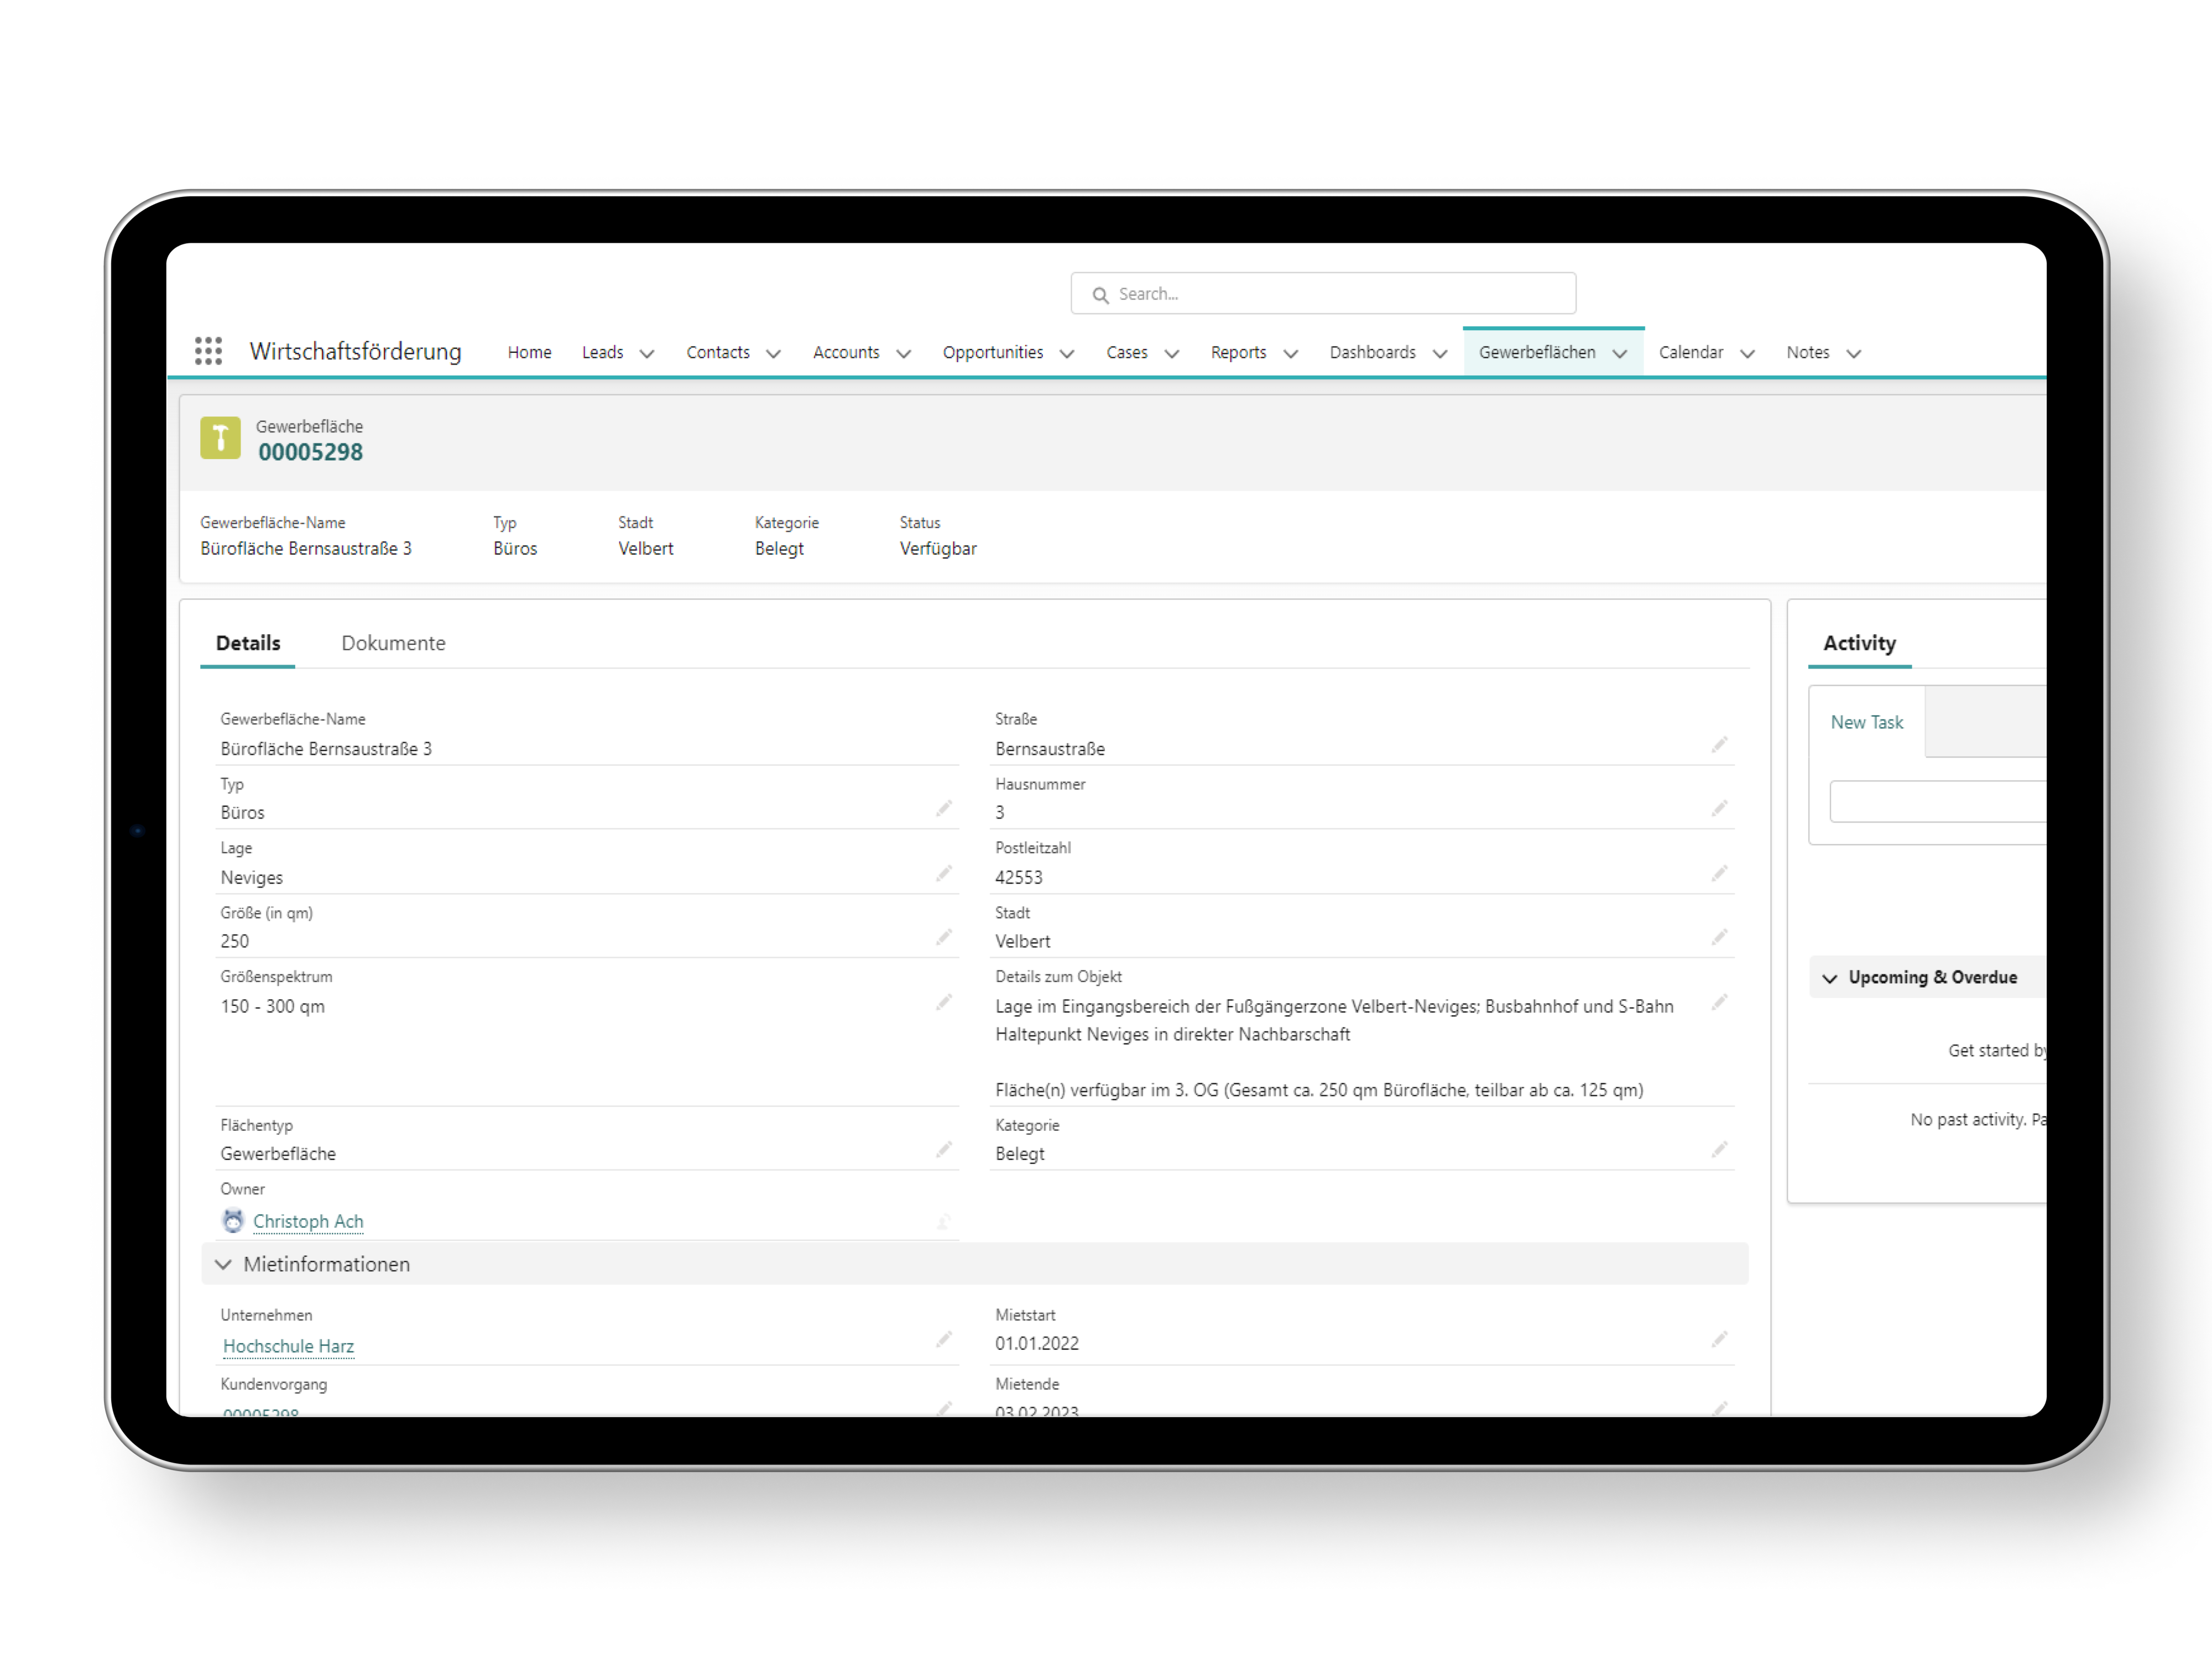 Screenshot of the Salesforce screen showing a commercial space including documents and the most important details.